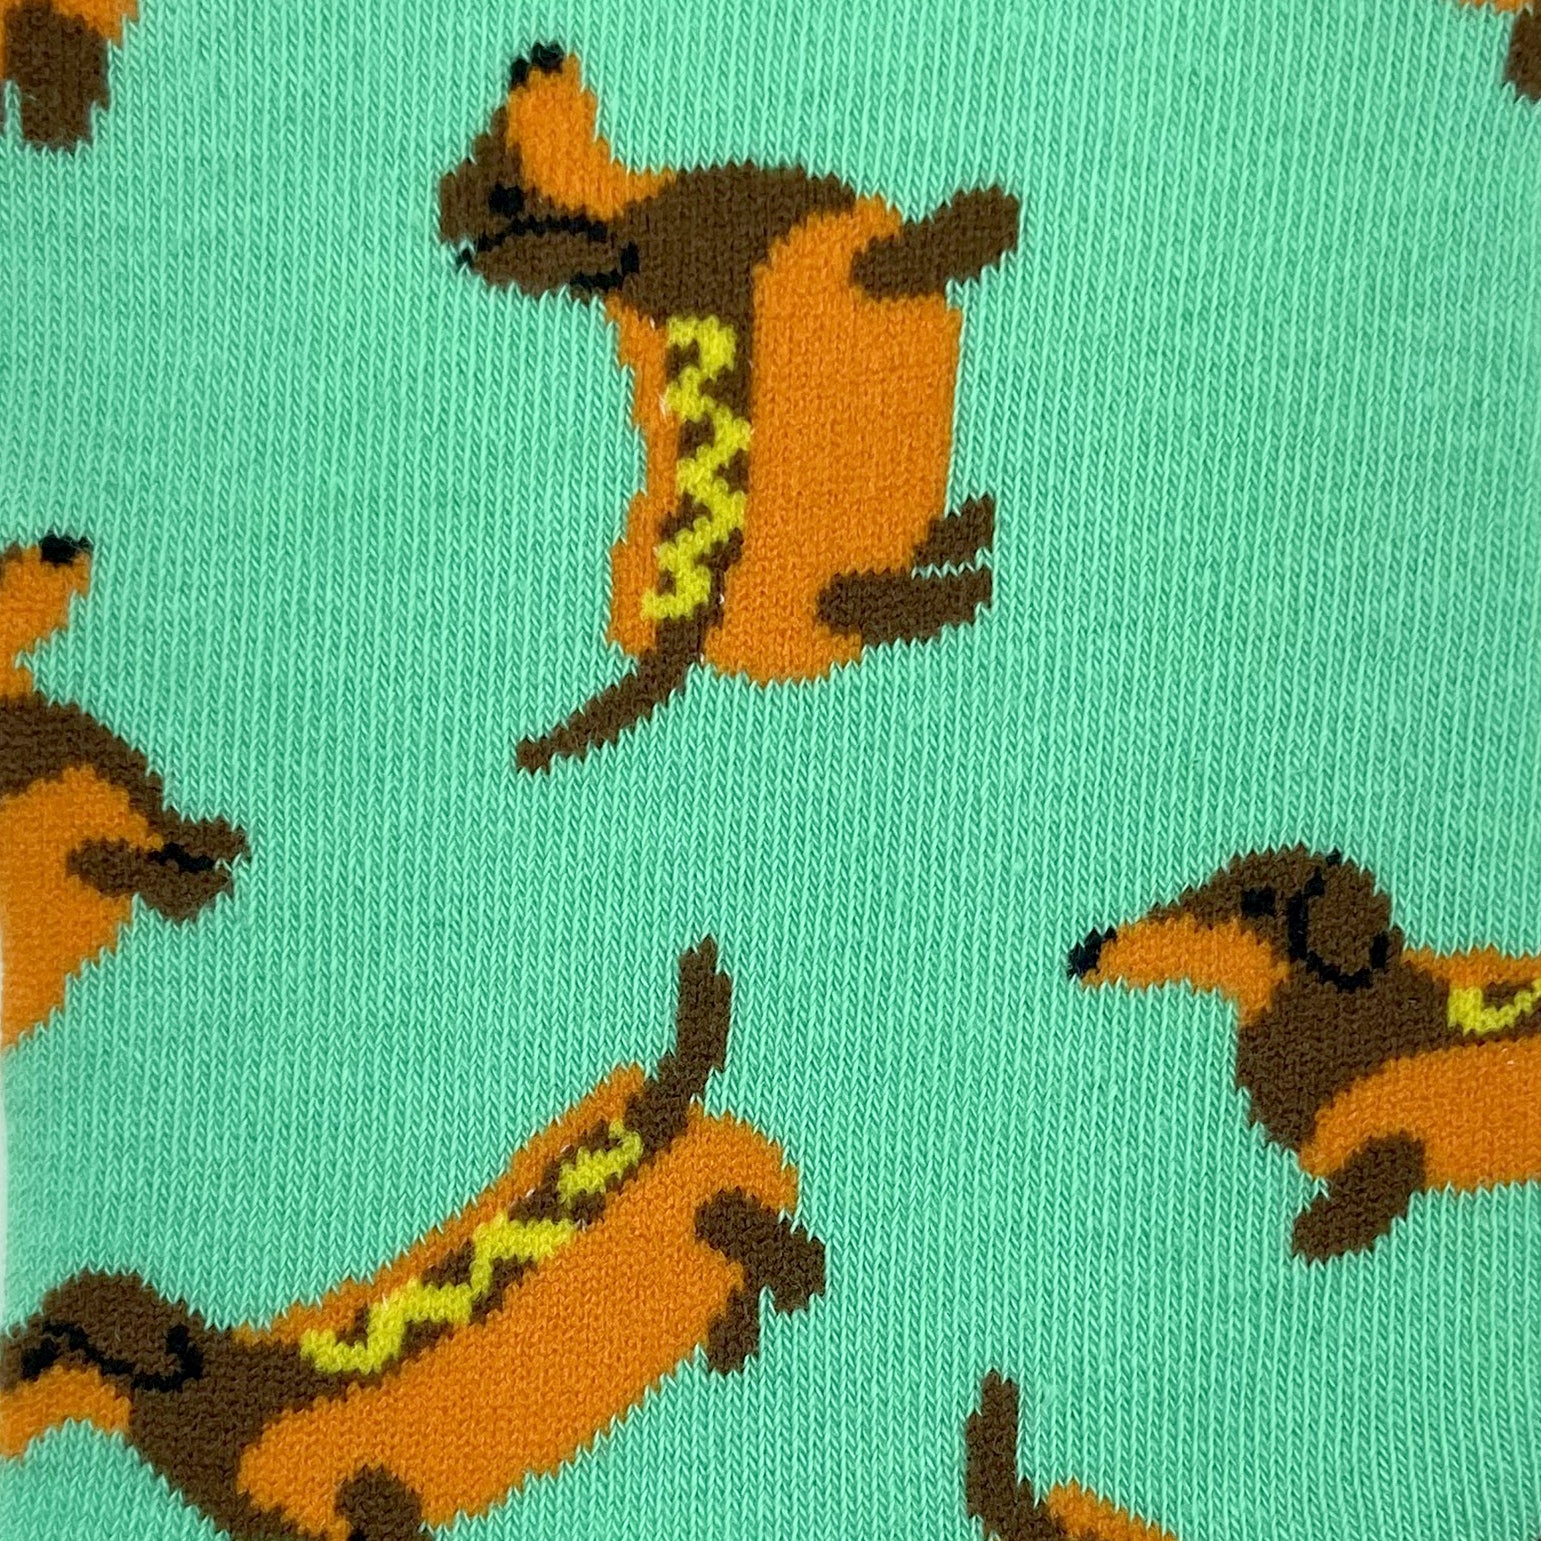 Adorable Dachshund Shaped Hot Dogs All Over Print Novelty Crew Socks